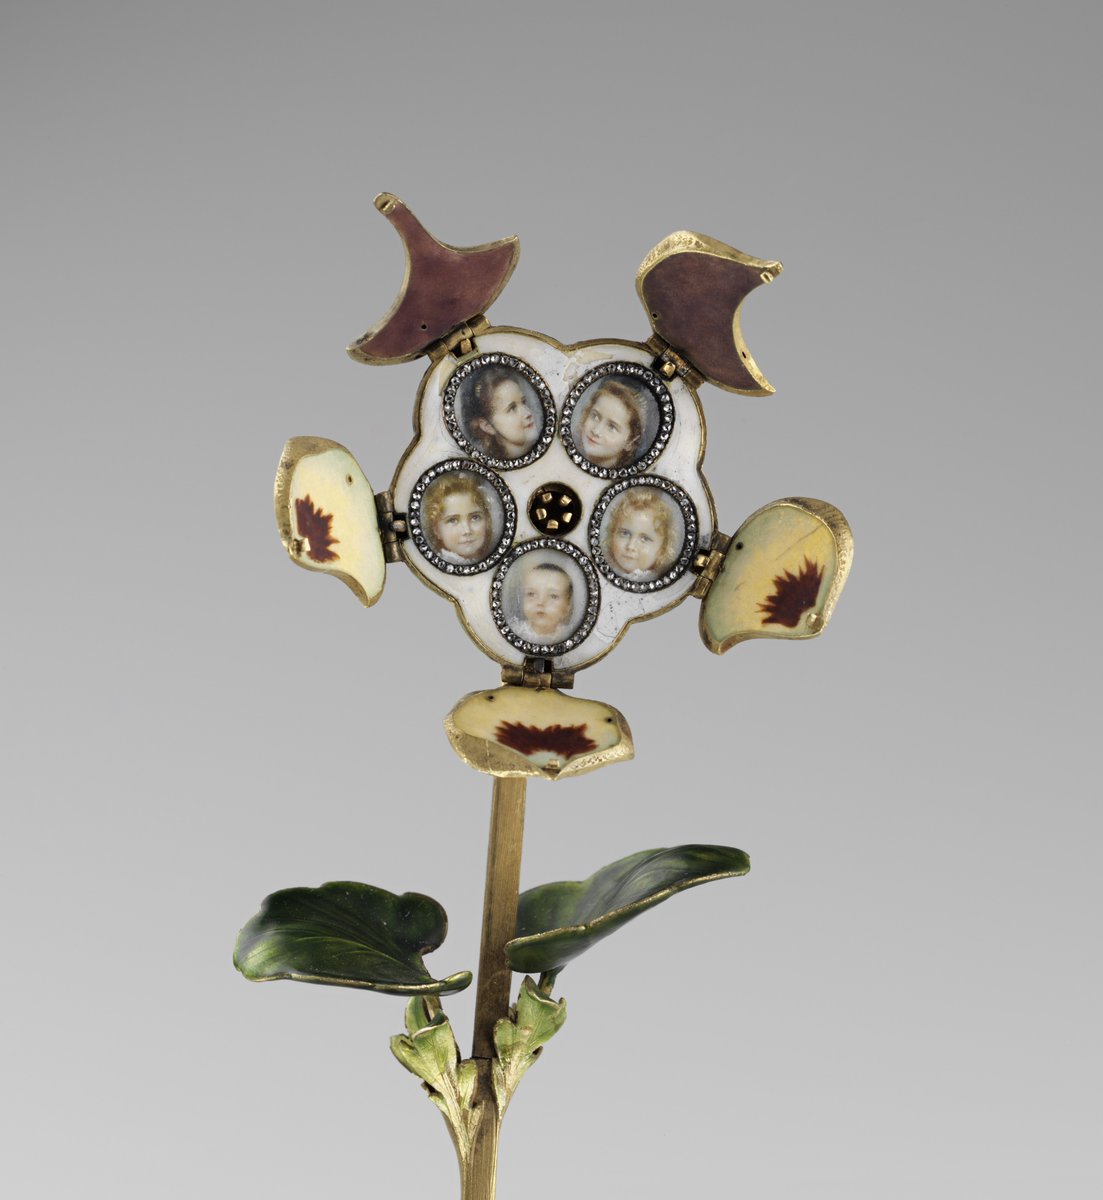 The pansy was given by Nicholas II to Empress Feodorovna for their 10th wedding anniversary in 1904. The petals unfold to reveal portrait miniatures encircled with diamonds of their five children. 

Book for #FabergéInLondon - fal.cn/3l2O3

The Moscow Kremlin Museums